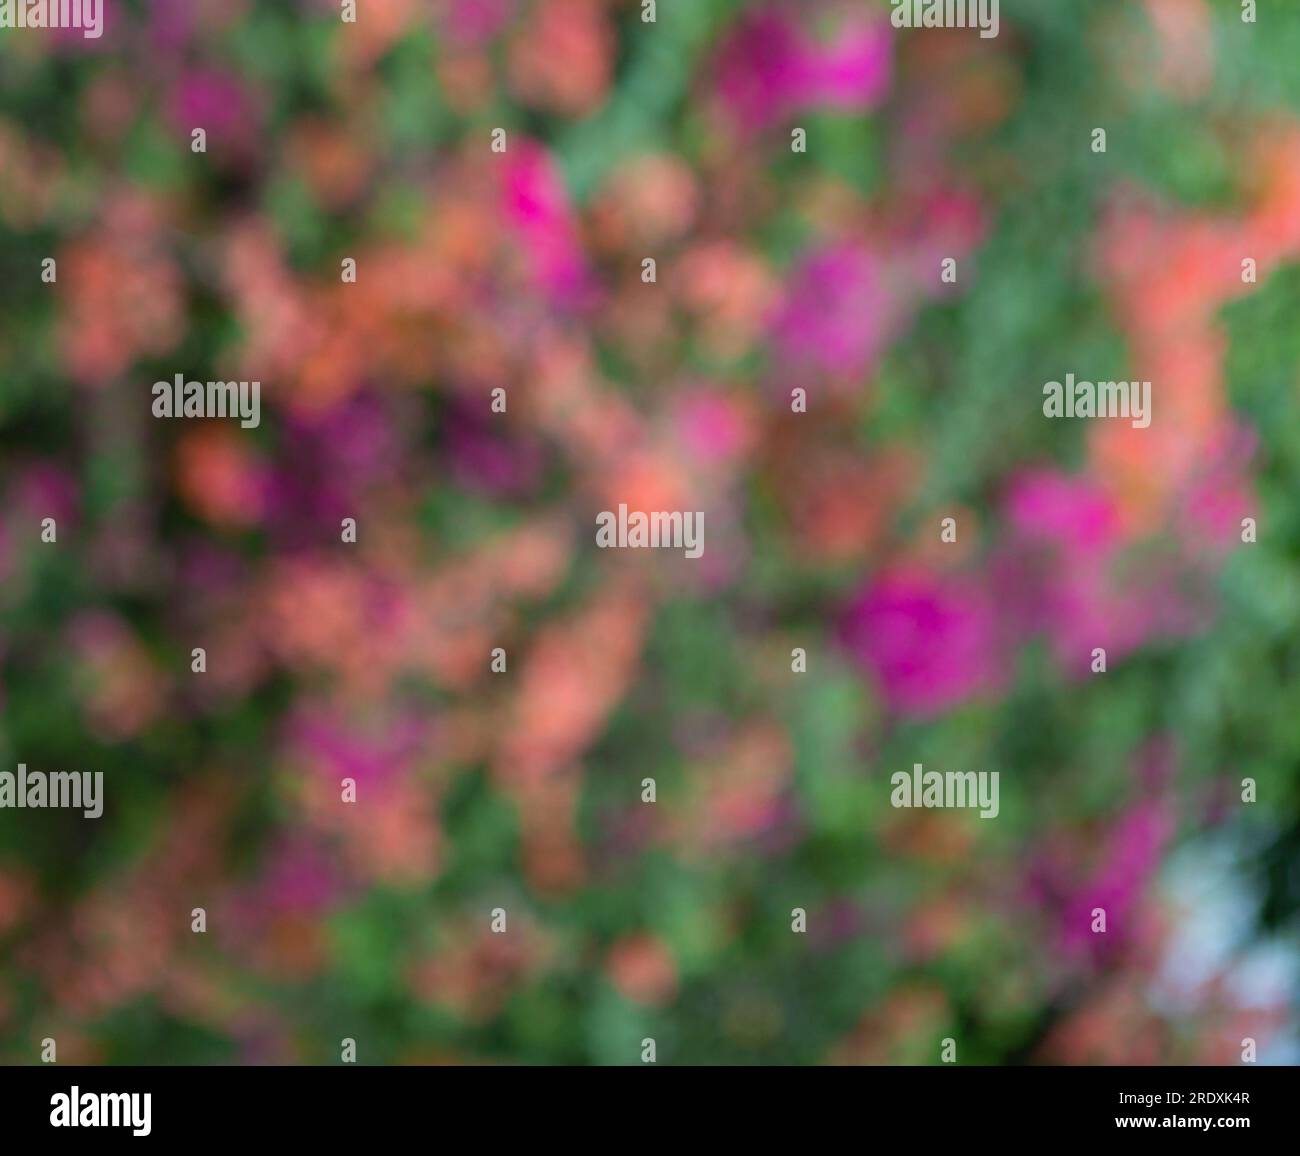 Multicolored, blurry, soft, blurry, abstract texture. Stock Photo